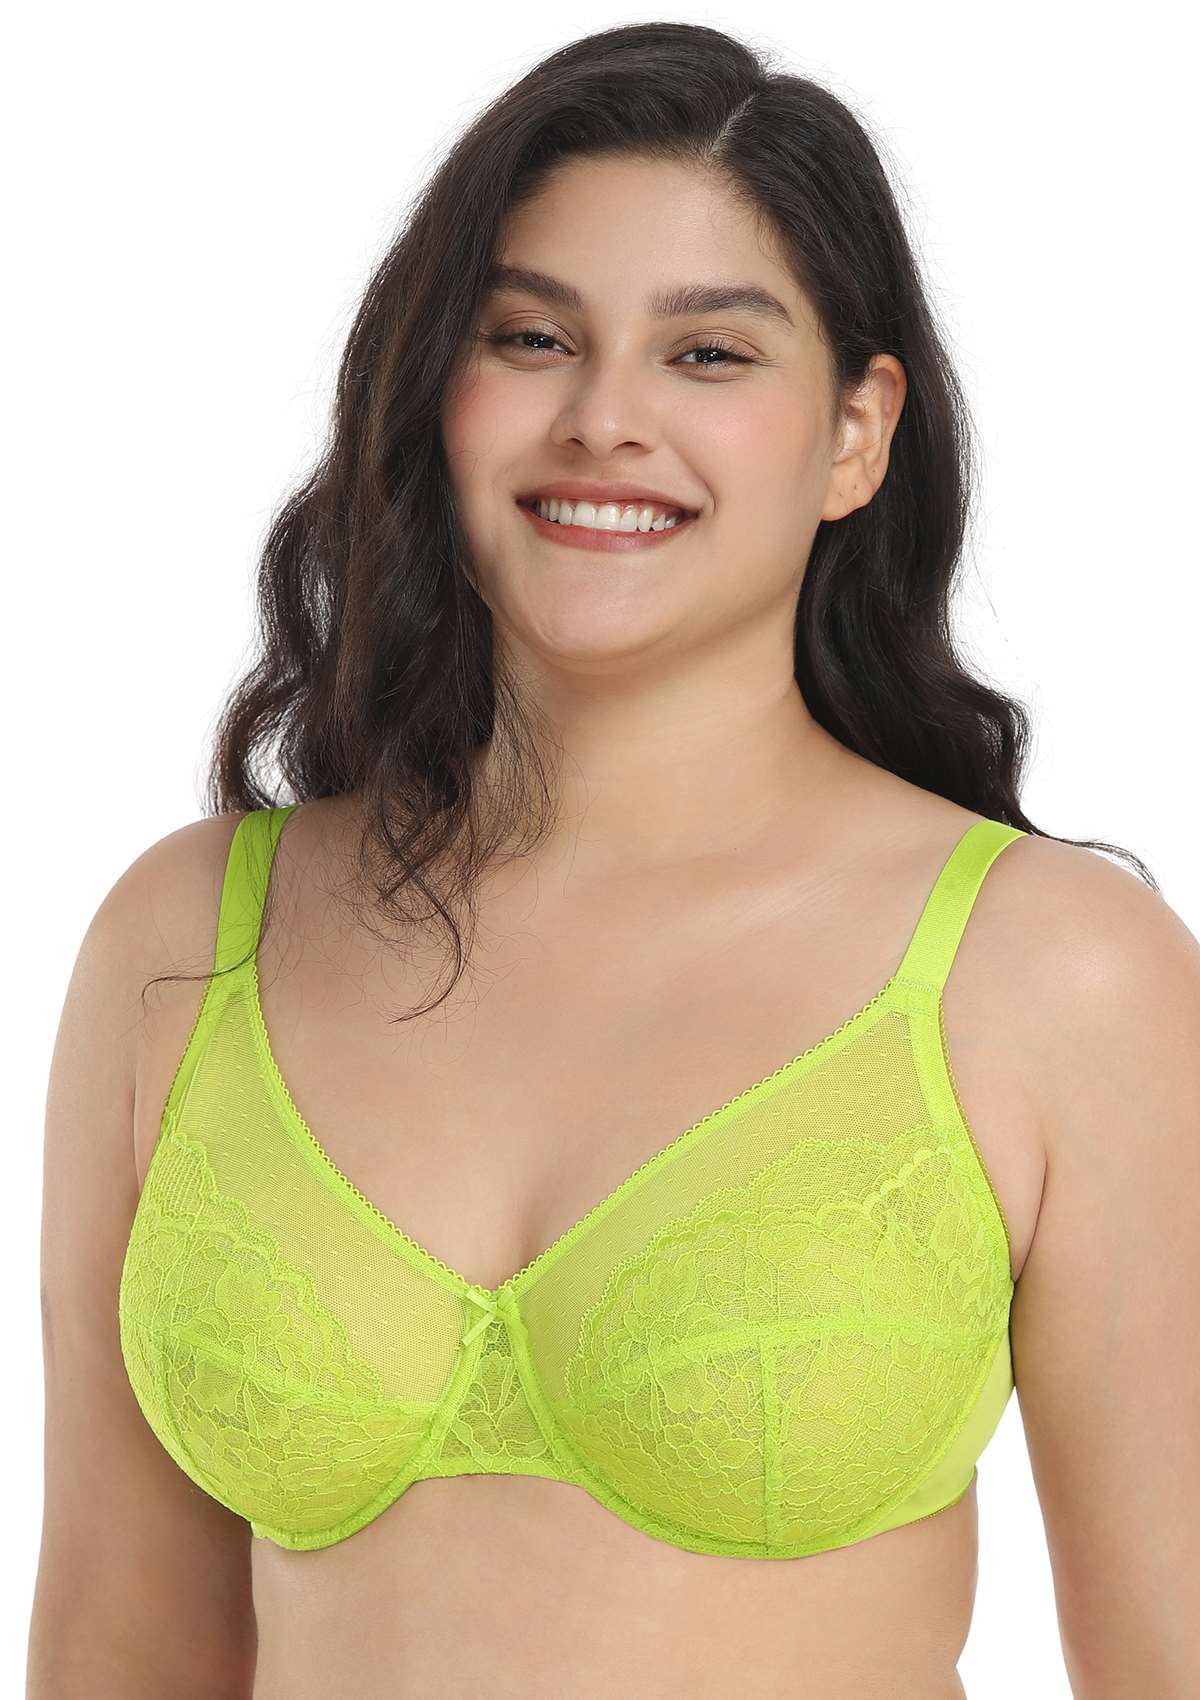 HSIA Enchante Full Cup Minimizing Bra: Supportive Unlined Lace Bra - Lime Green / 36 / DDD/F